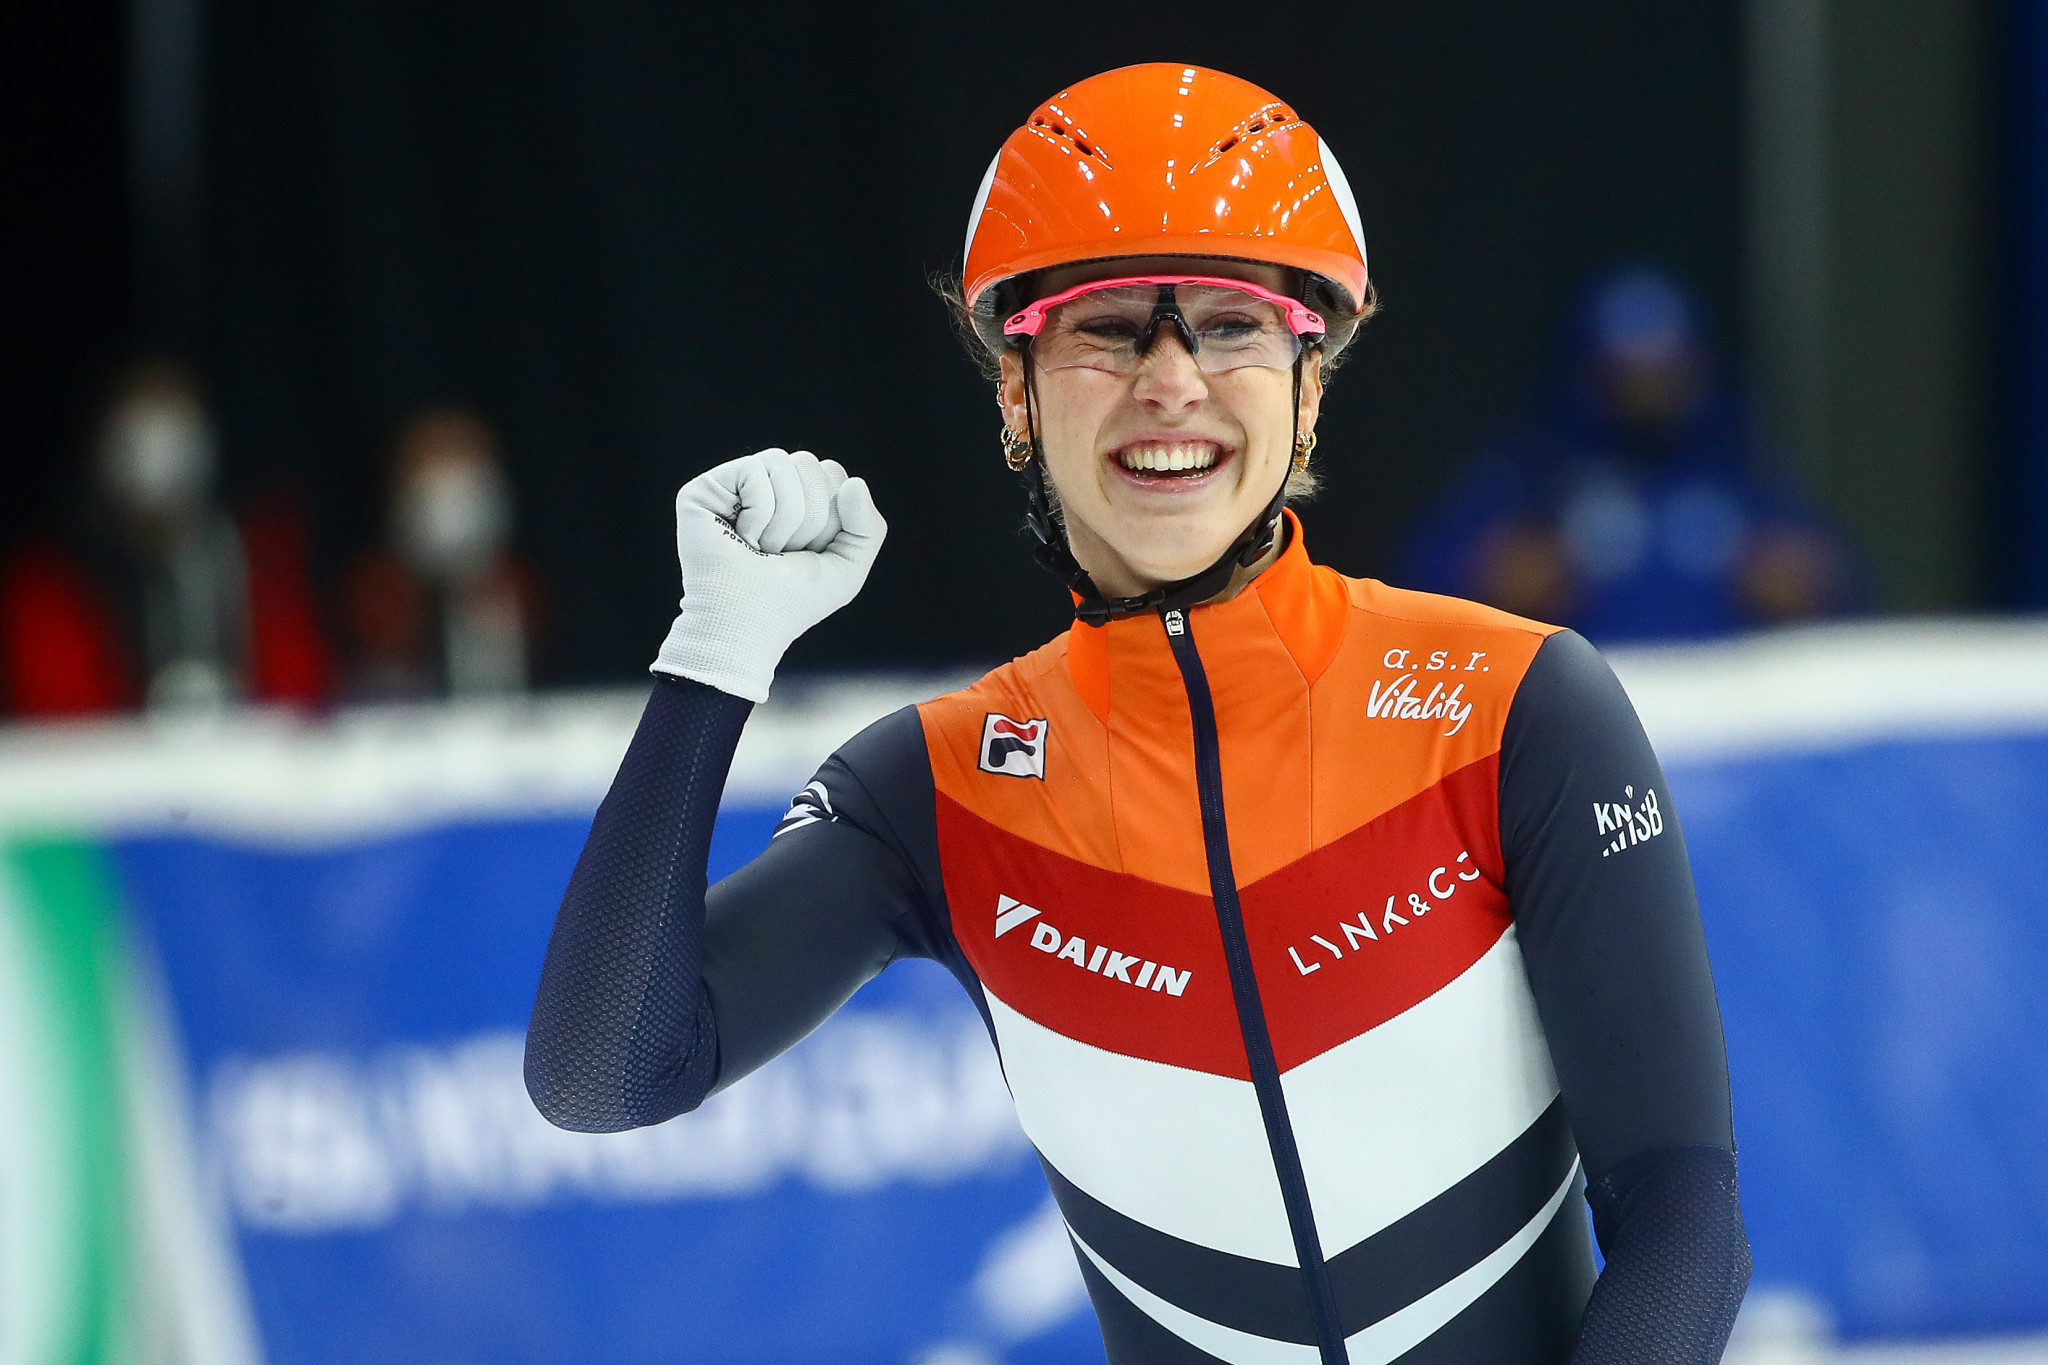 Suzanne Schulting of The Netherlands triumphed in the women's 500m and 1,500m in Debrecen ©Getty Images